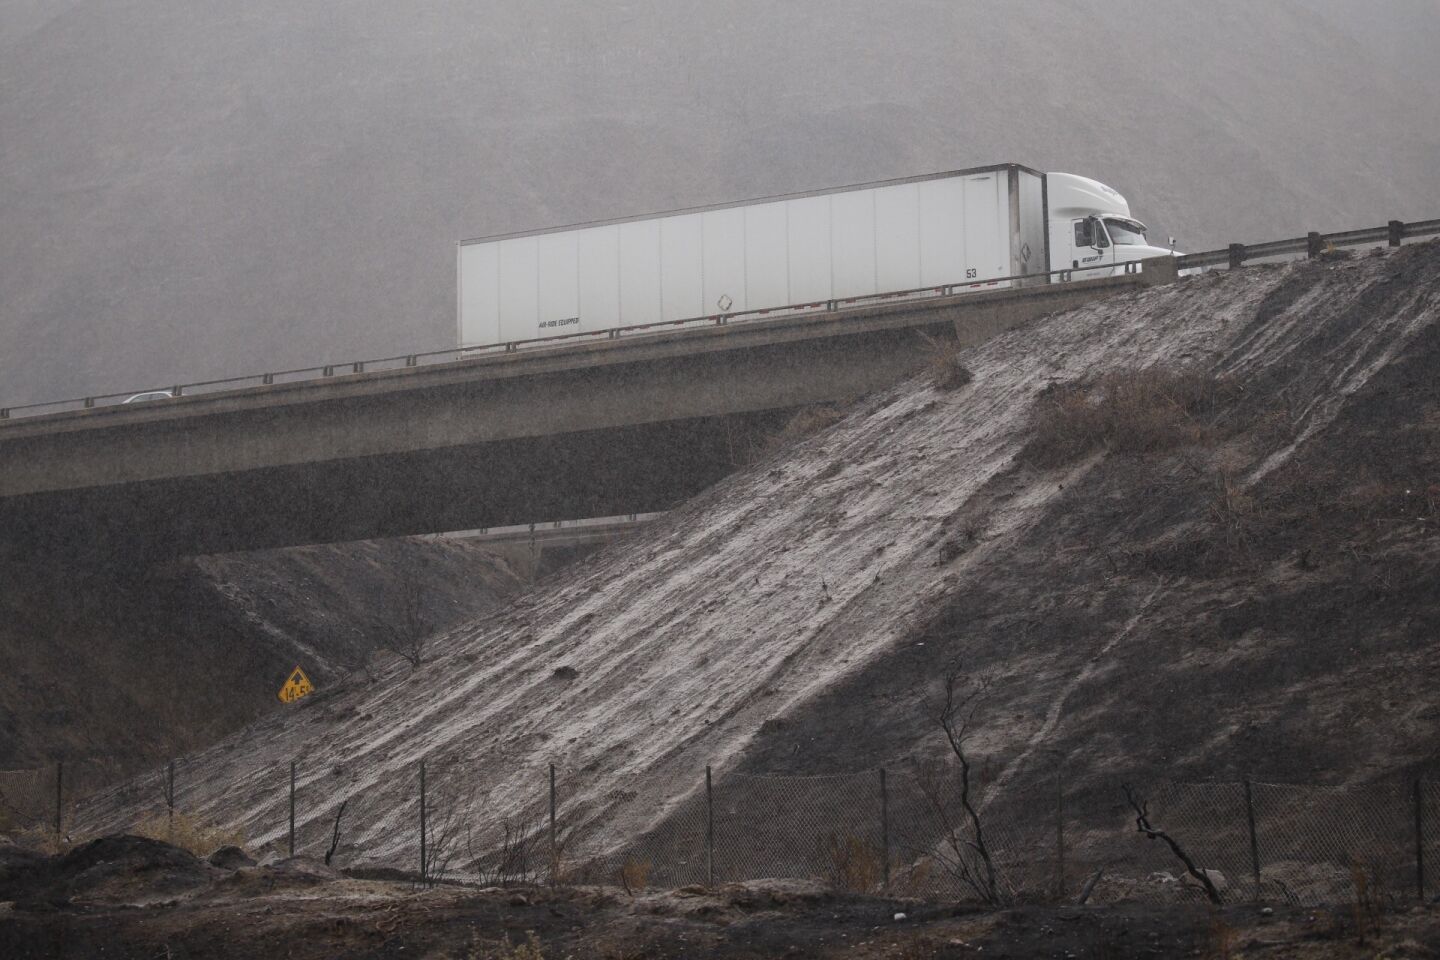 Vehicles are slowed for miles on both North and South bound lanes of the 101 Freeway at Solimar Beach in western Ventura County as mud from the recent Solimar fire covers all lanes Tuesday morning.